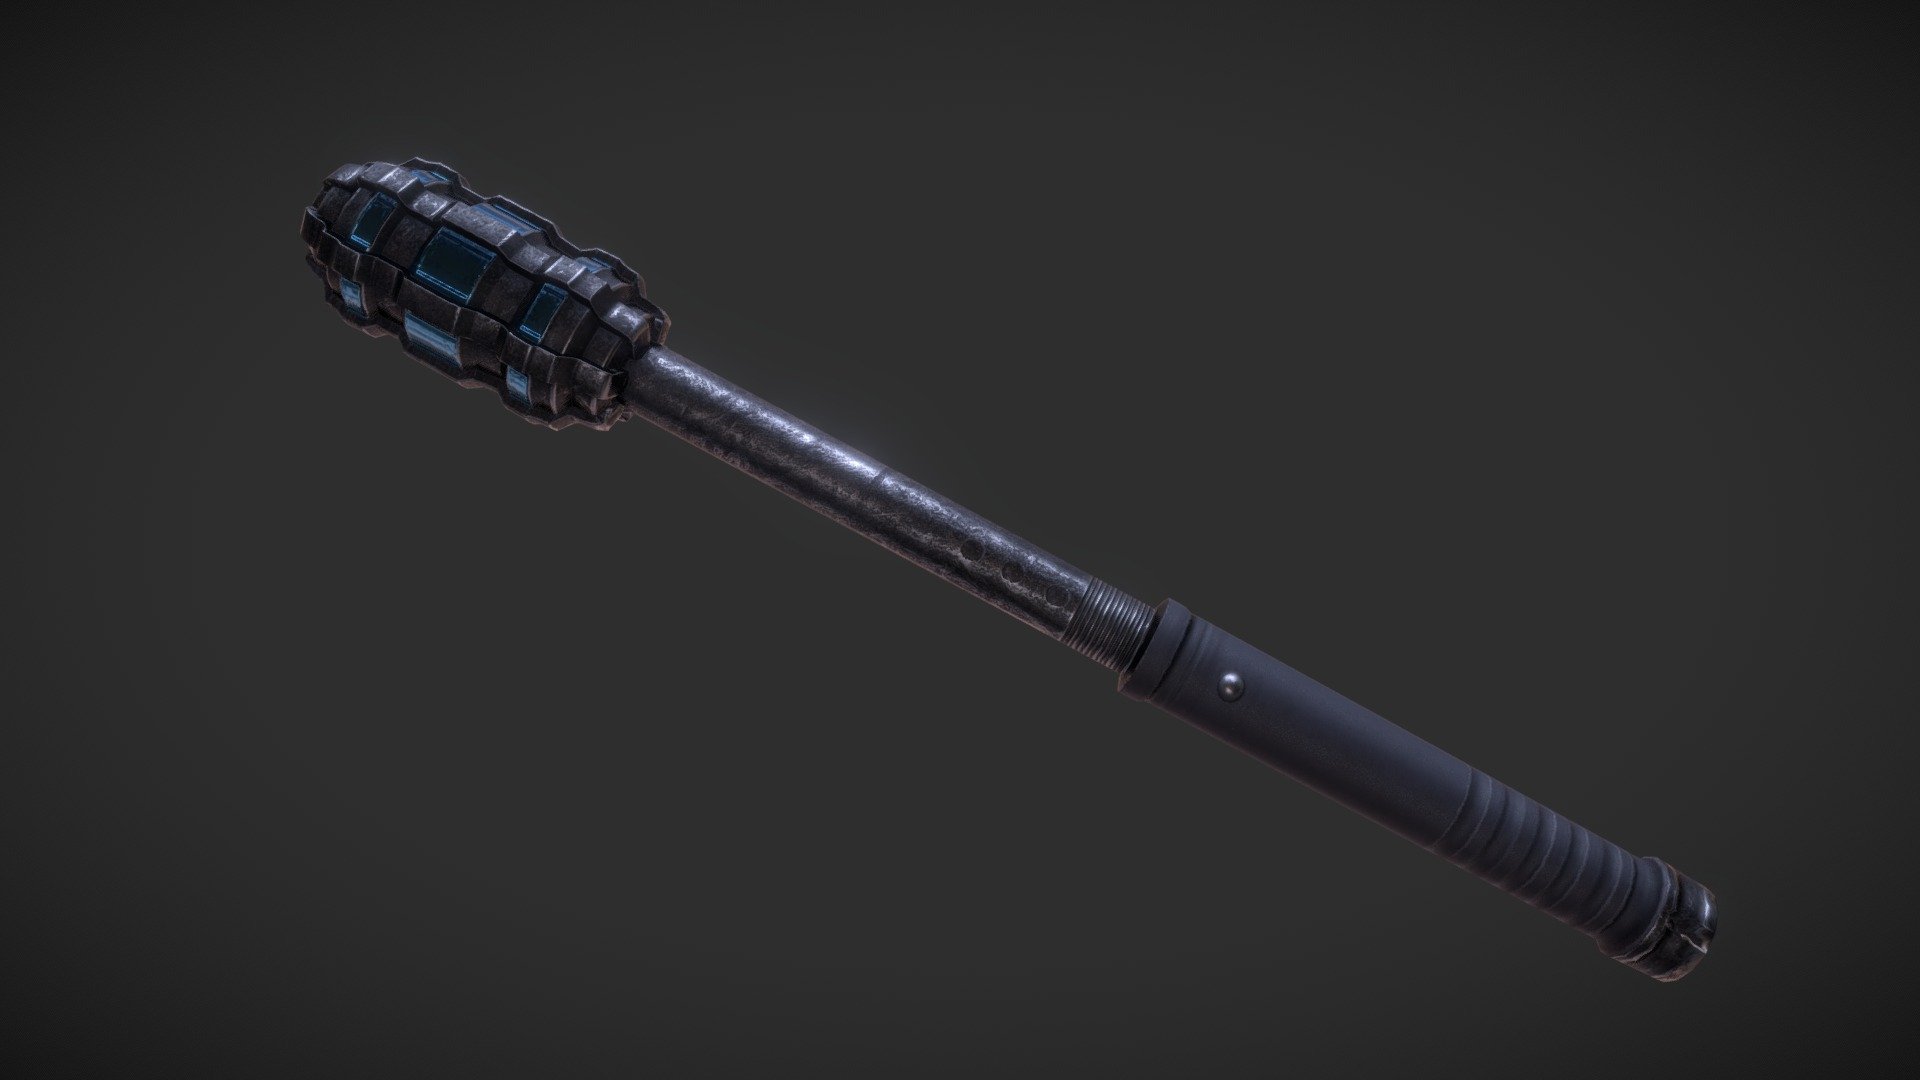 Telescopic Electric Mace for police
Made in Zbrush - Electic Mace for Police - 3D model by Artalasky 3d model